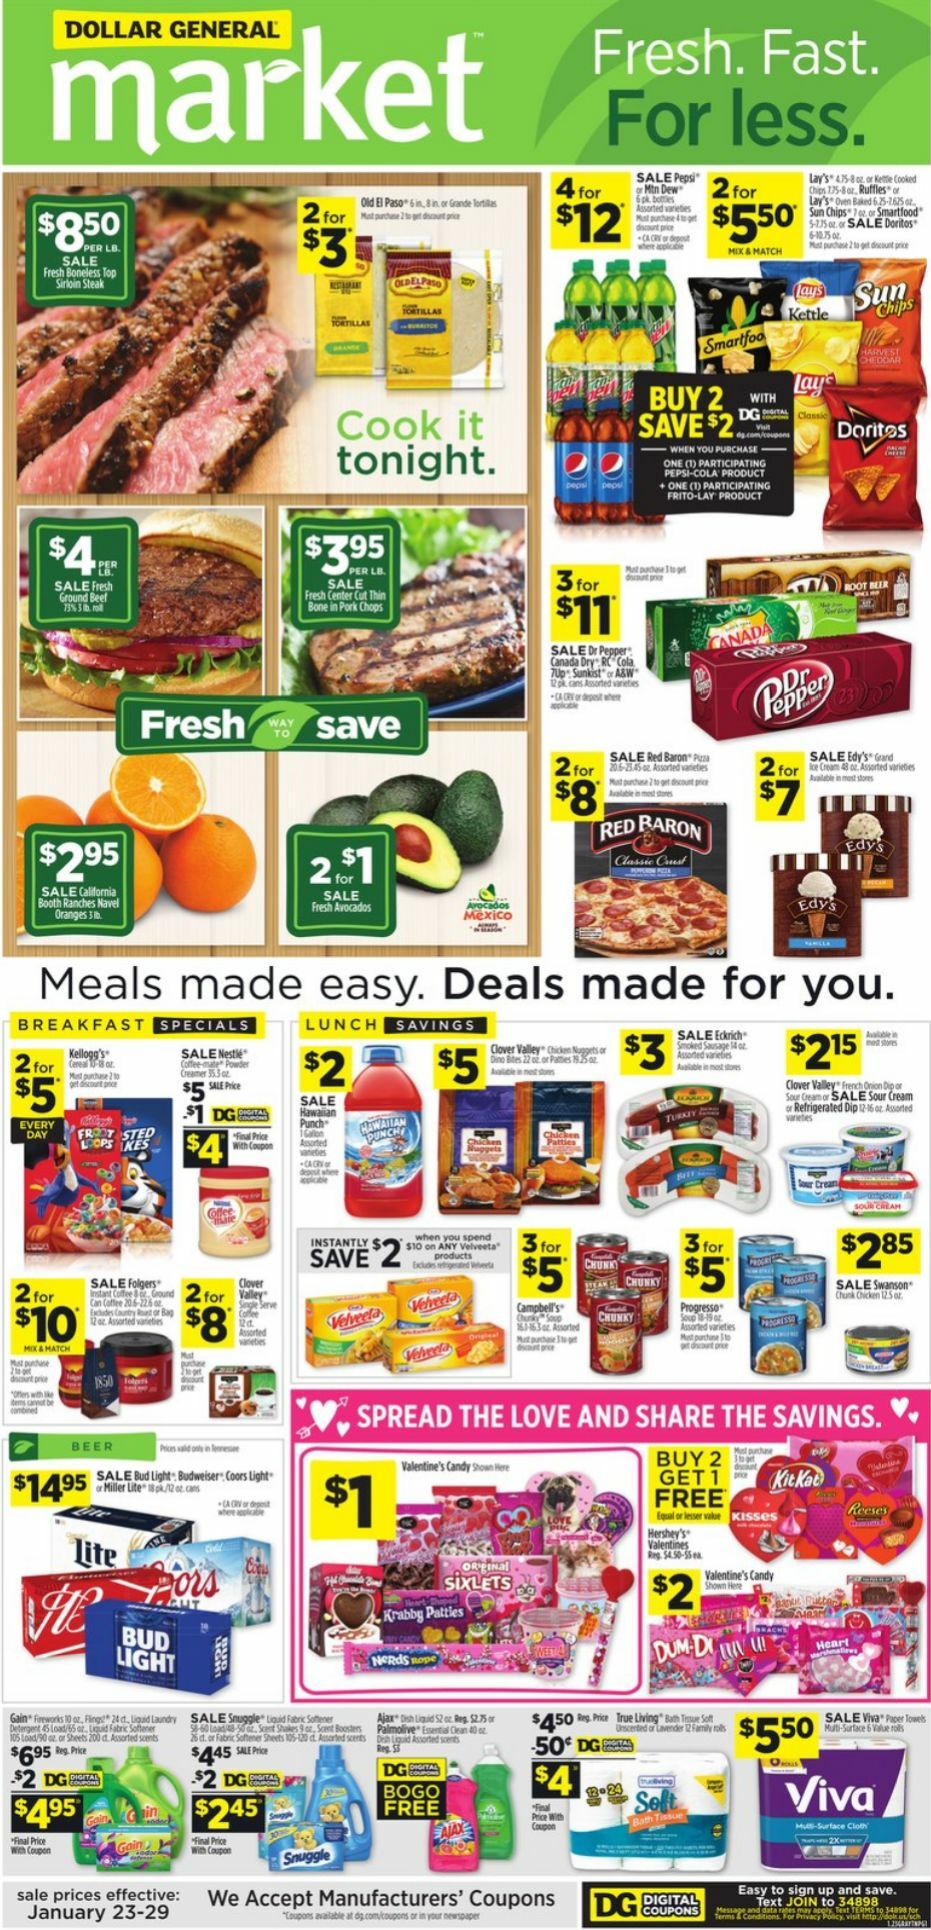 Dollar General Market Ad Weekly Ad from January 23